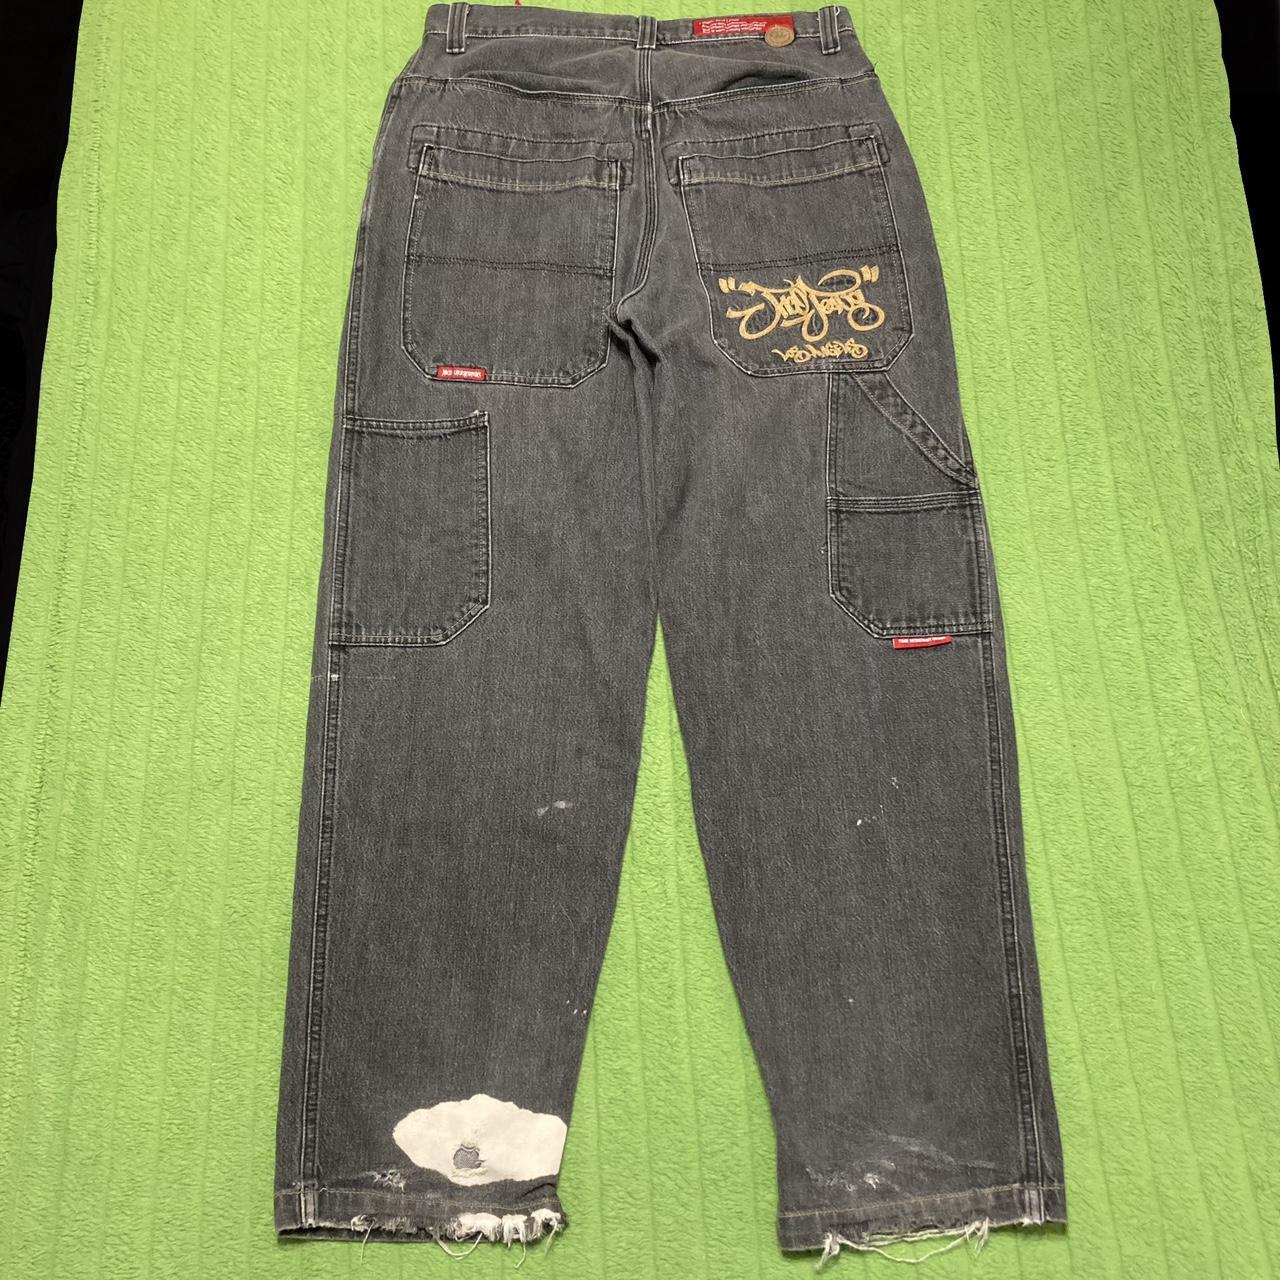 Cyber Y2k baggy jnco jeans Los Angeles embroidered... - Depop